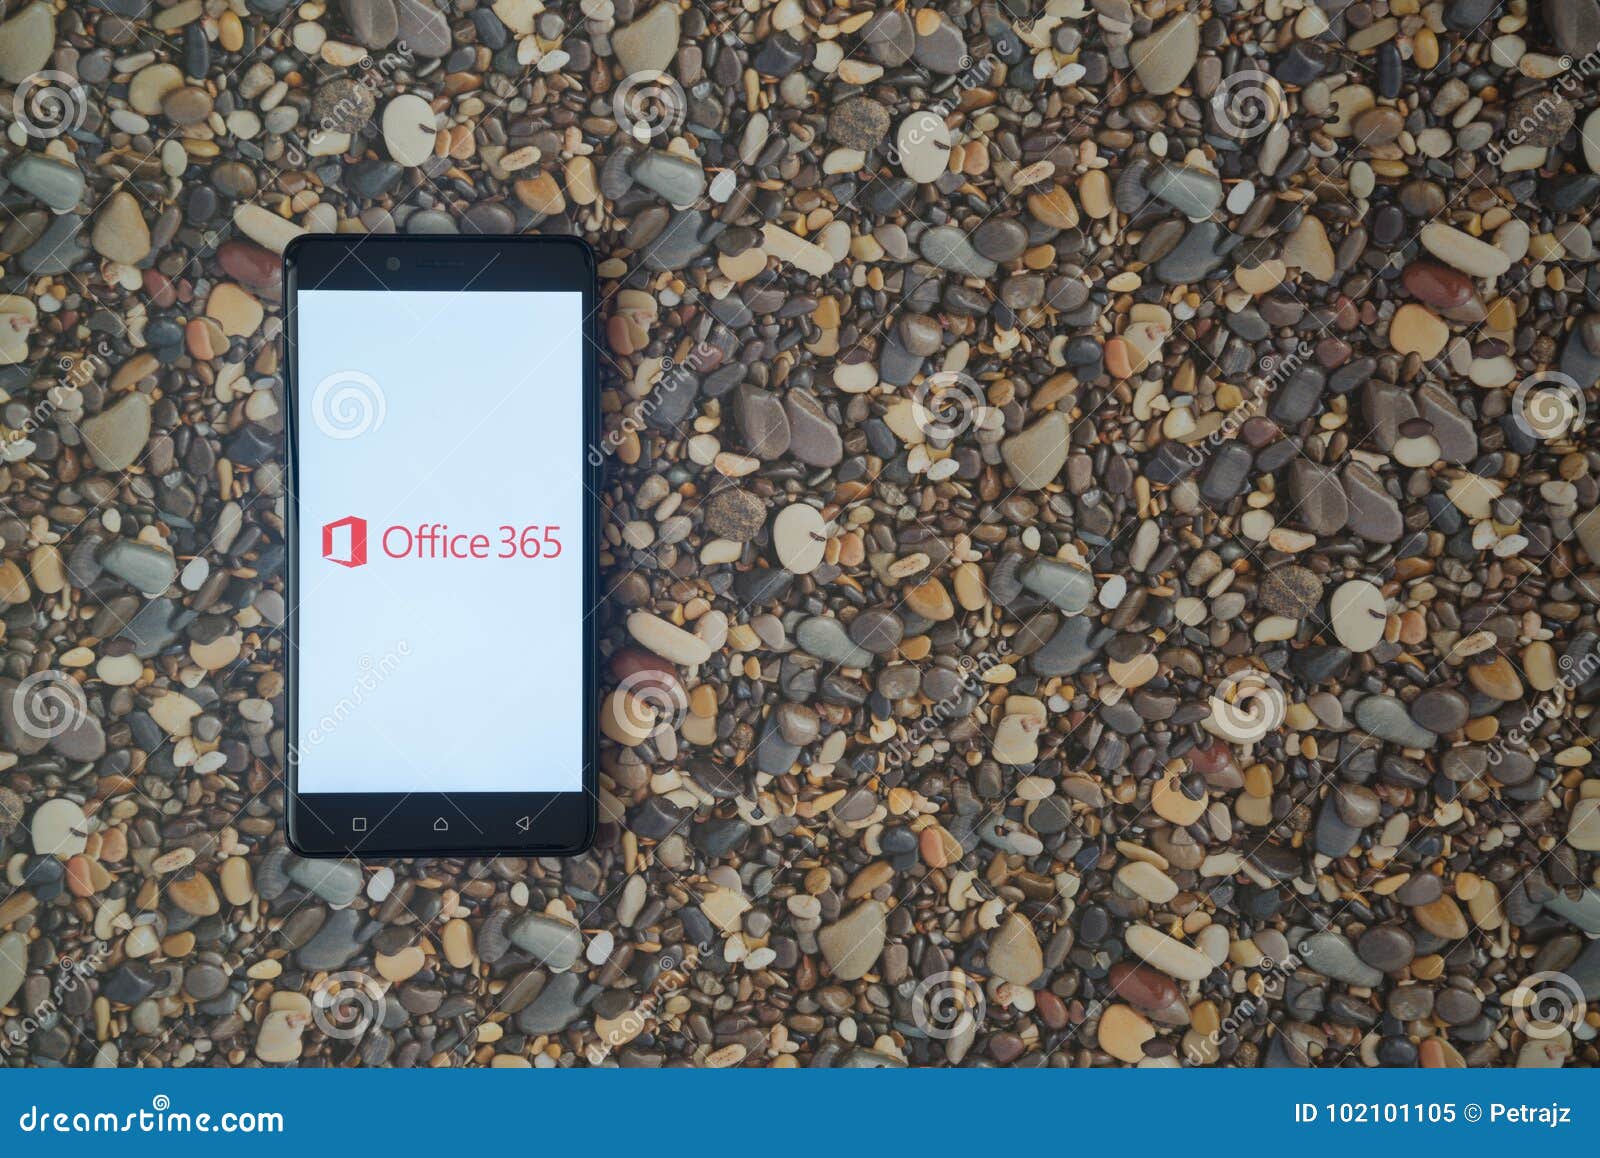 Microsoft Office 365 Logo on Smartphone on Background of Small Stones  Editorial Image - Image of angeles, modern: 102101105